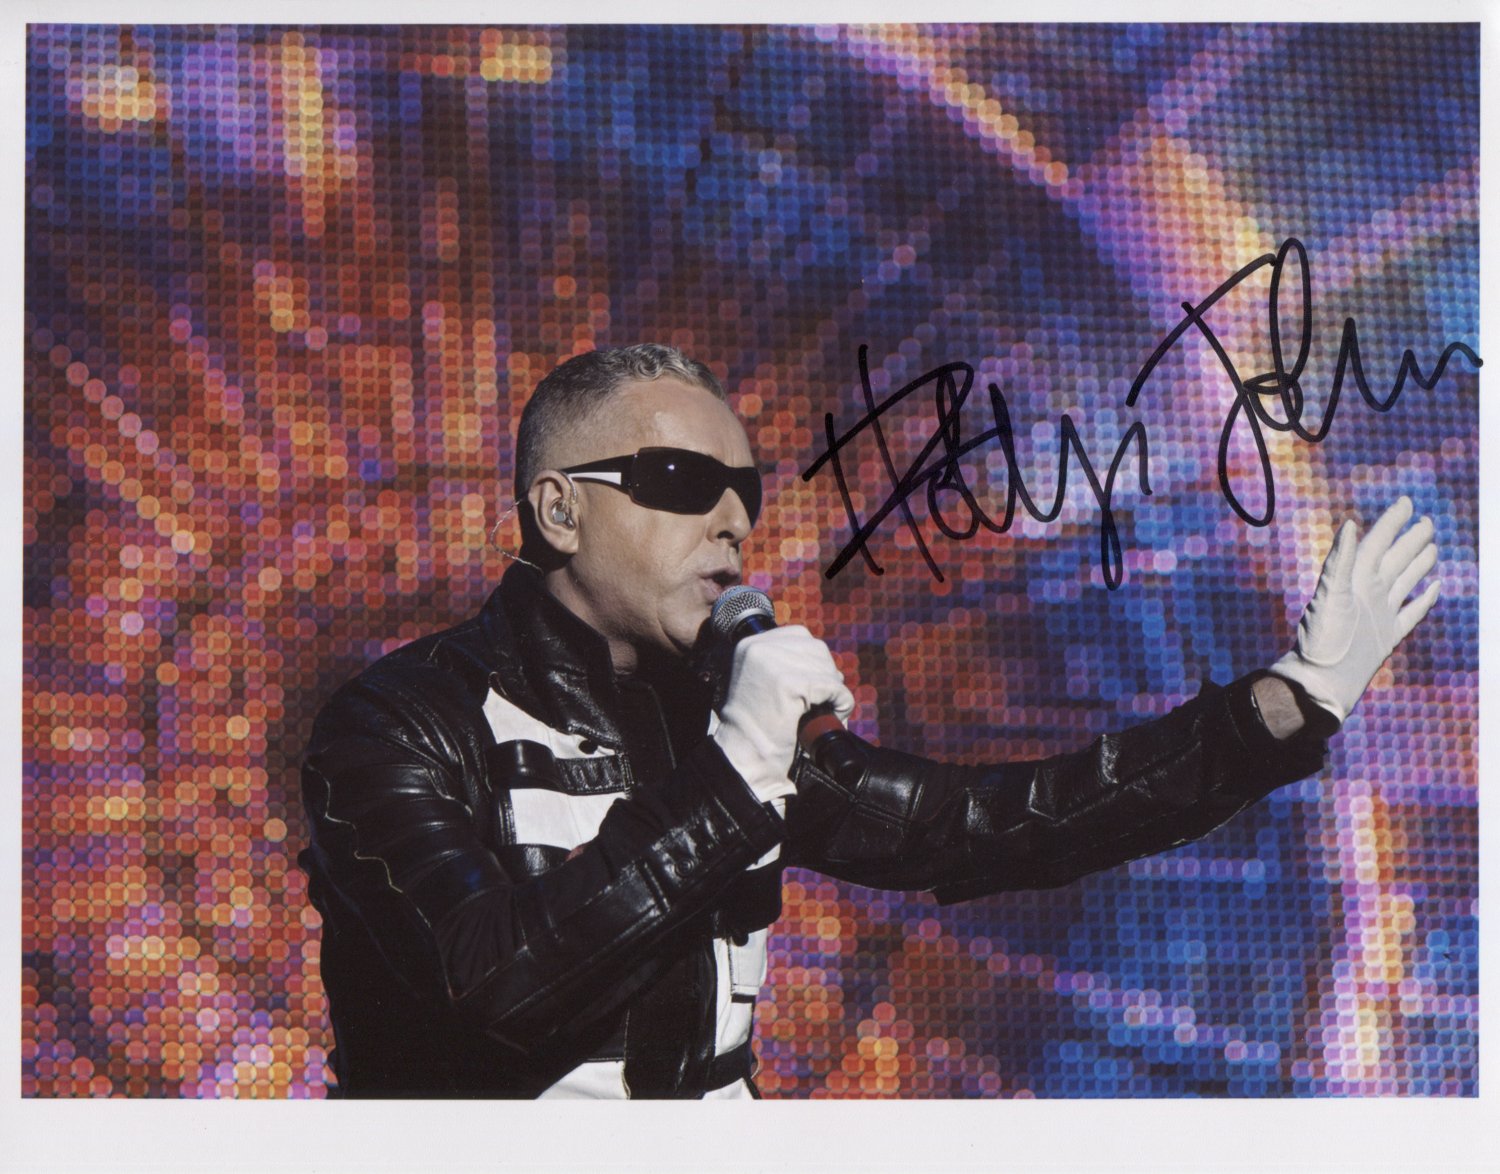 Holly Johnson FGTH SIGNED 8 x 10 Photo + Certificate Of Authentication  100% Genuine